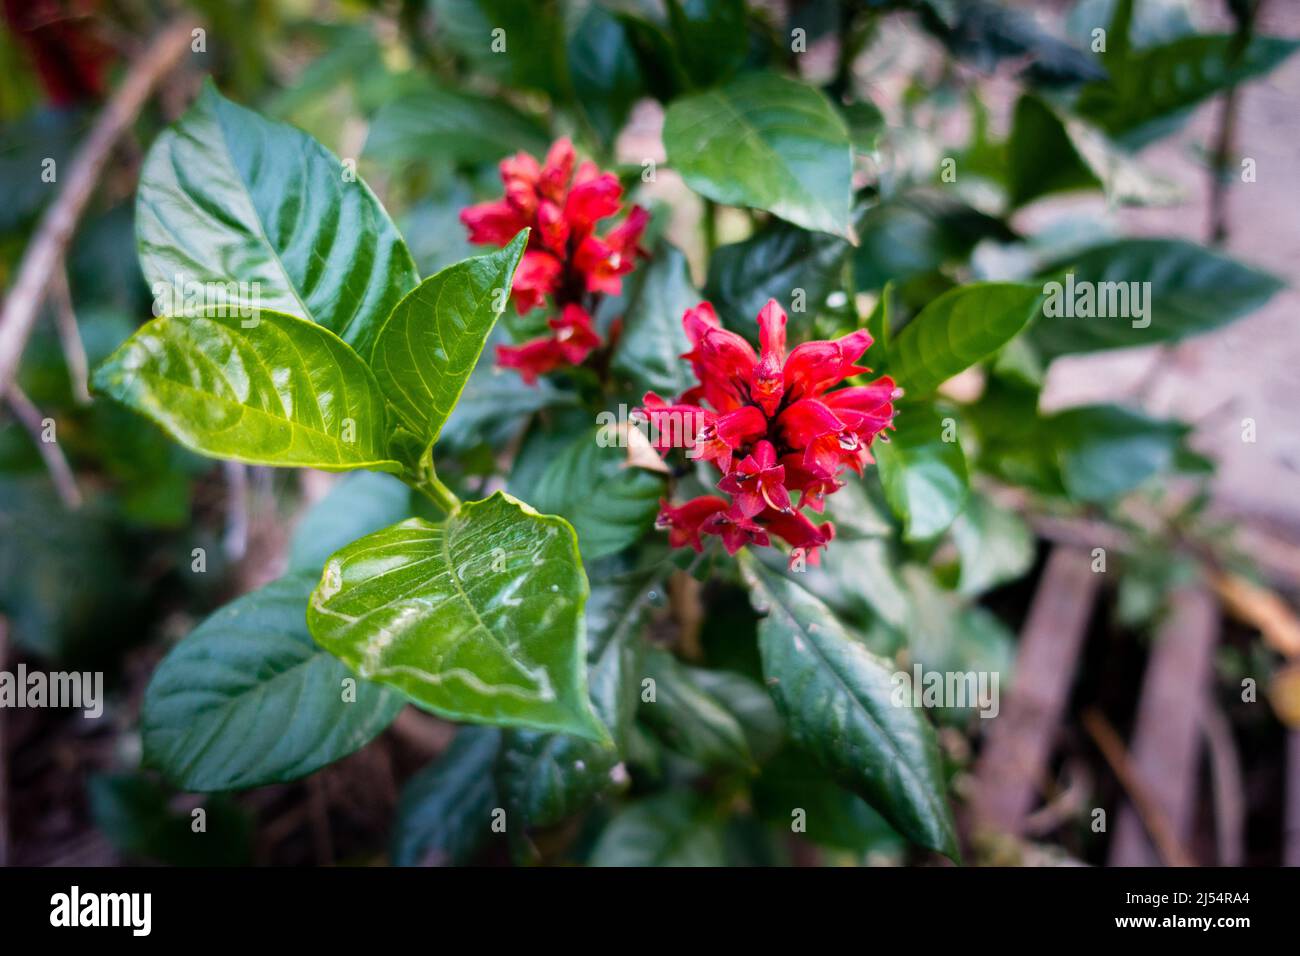 Cestrum fasciculatum flowers and leaves, it is a species of flowering plant in the family Solanaceae known by the common names early jessamine and red Stock Photo